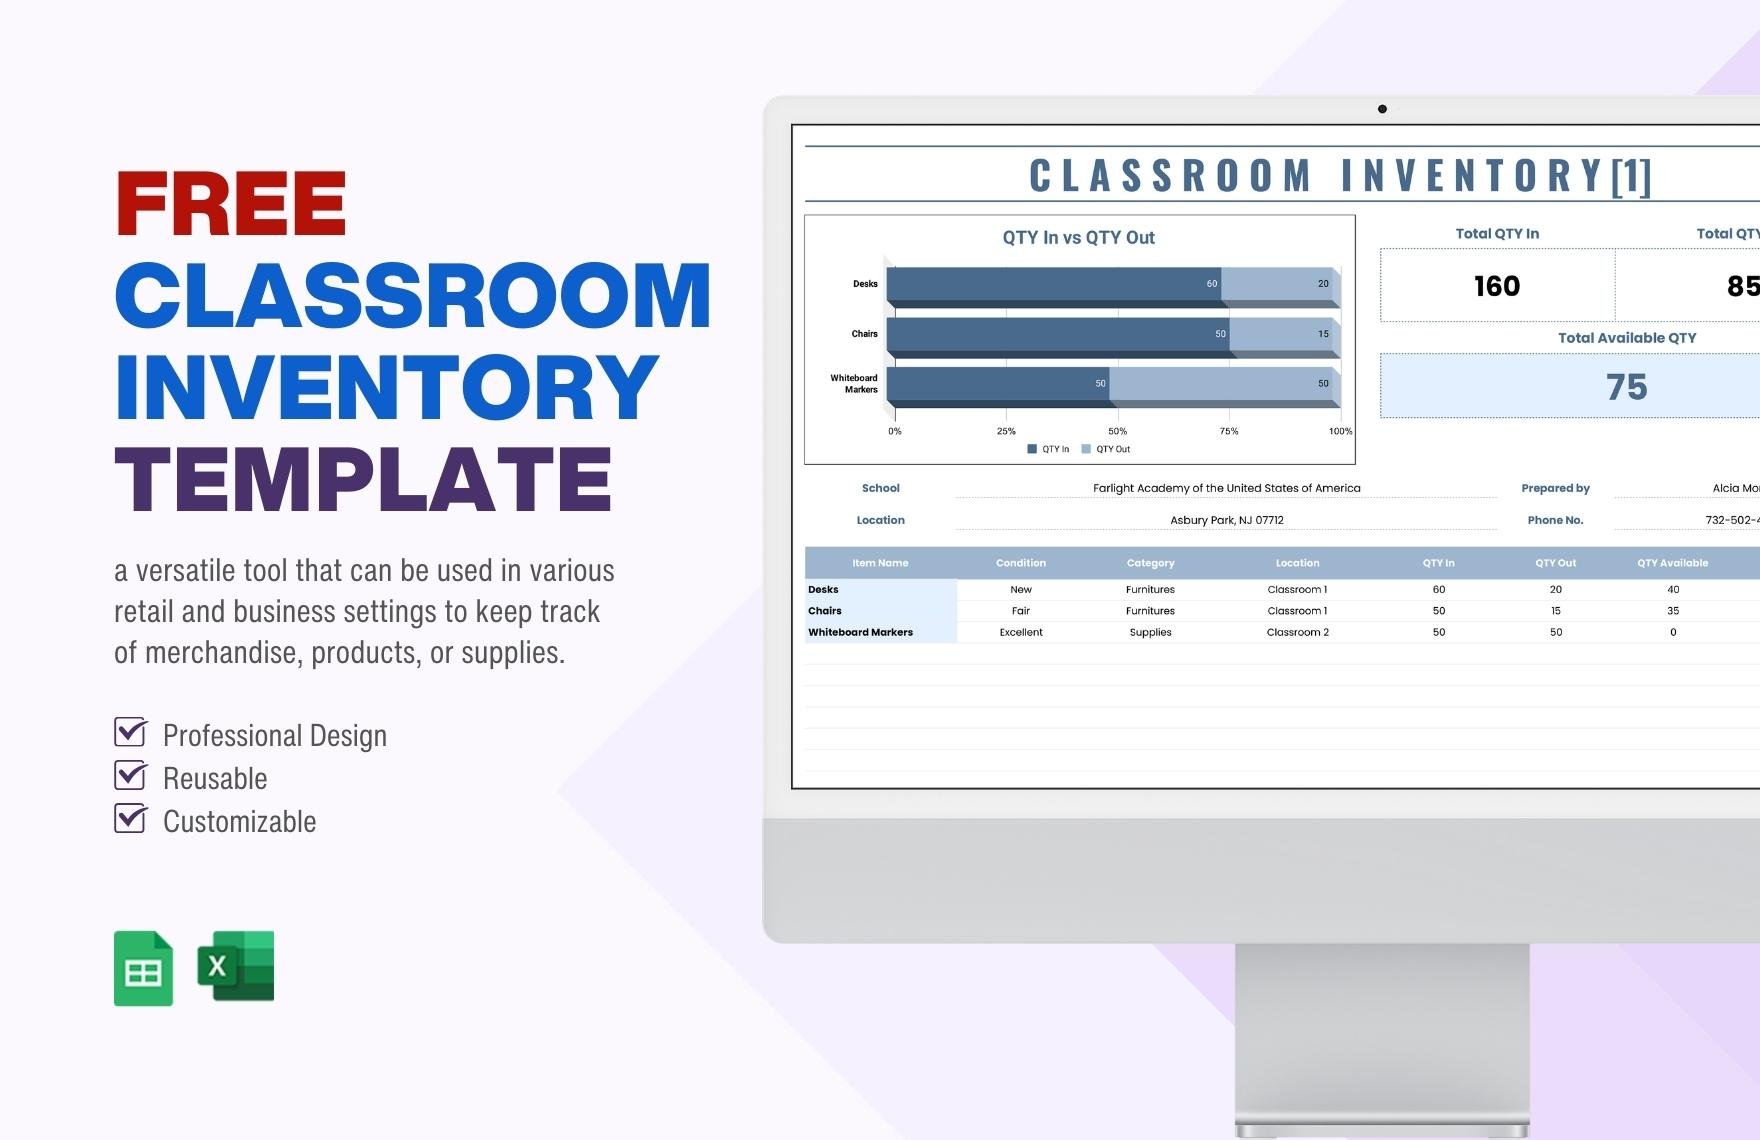 Classroom Inventory Template